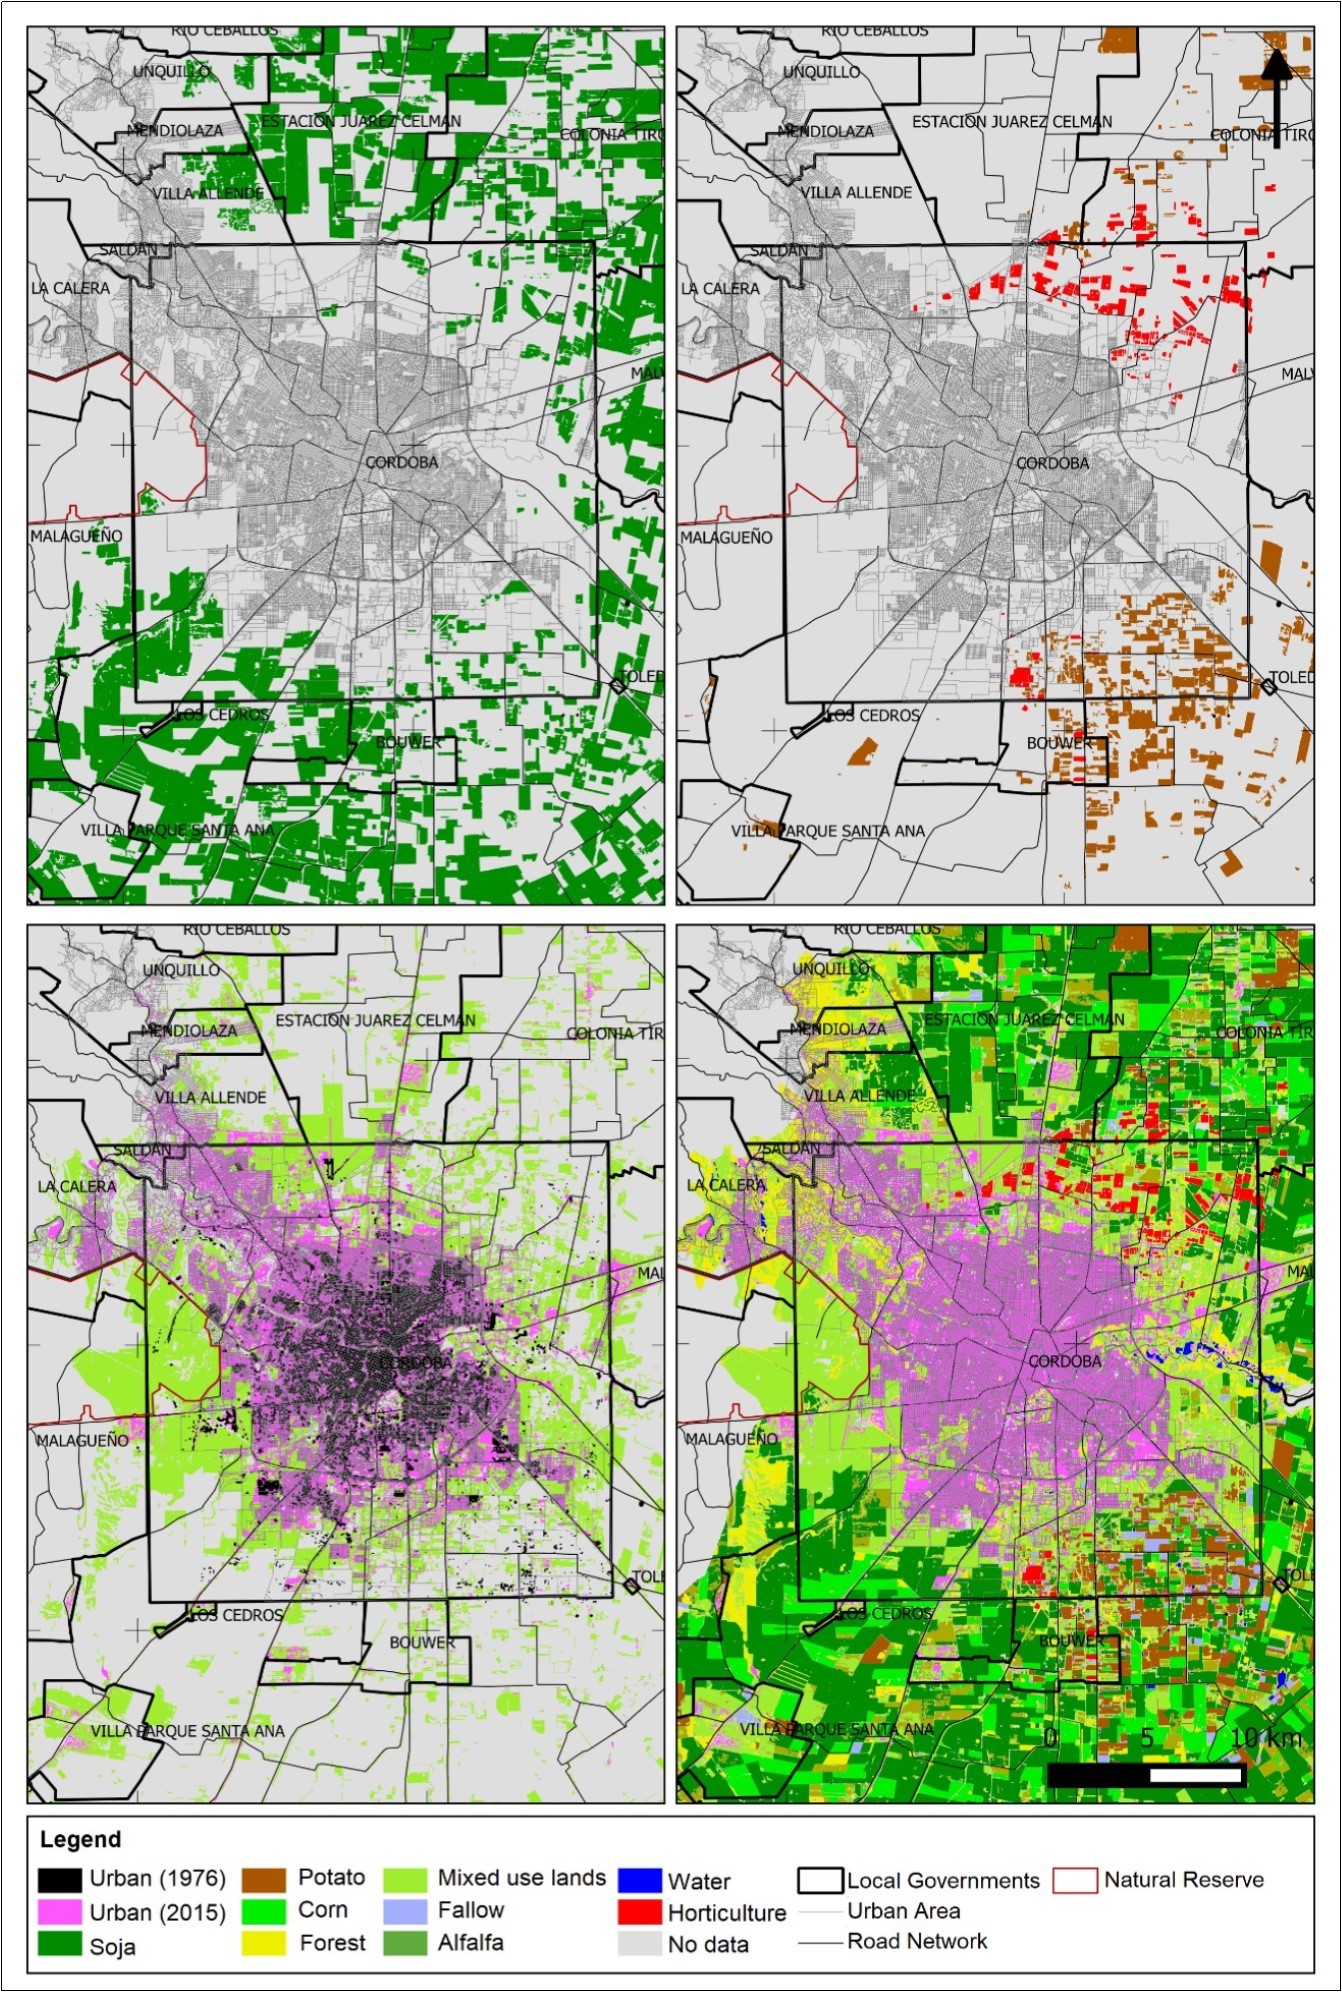  Land cover types and uses: Above (left): Distribution of soybean crops. Above (right): Distribution of intensive production. Below (left): Urban and mixed use zones. Below (left): Complete map of cover types.